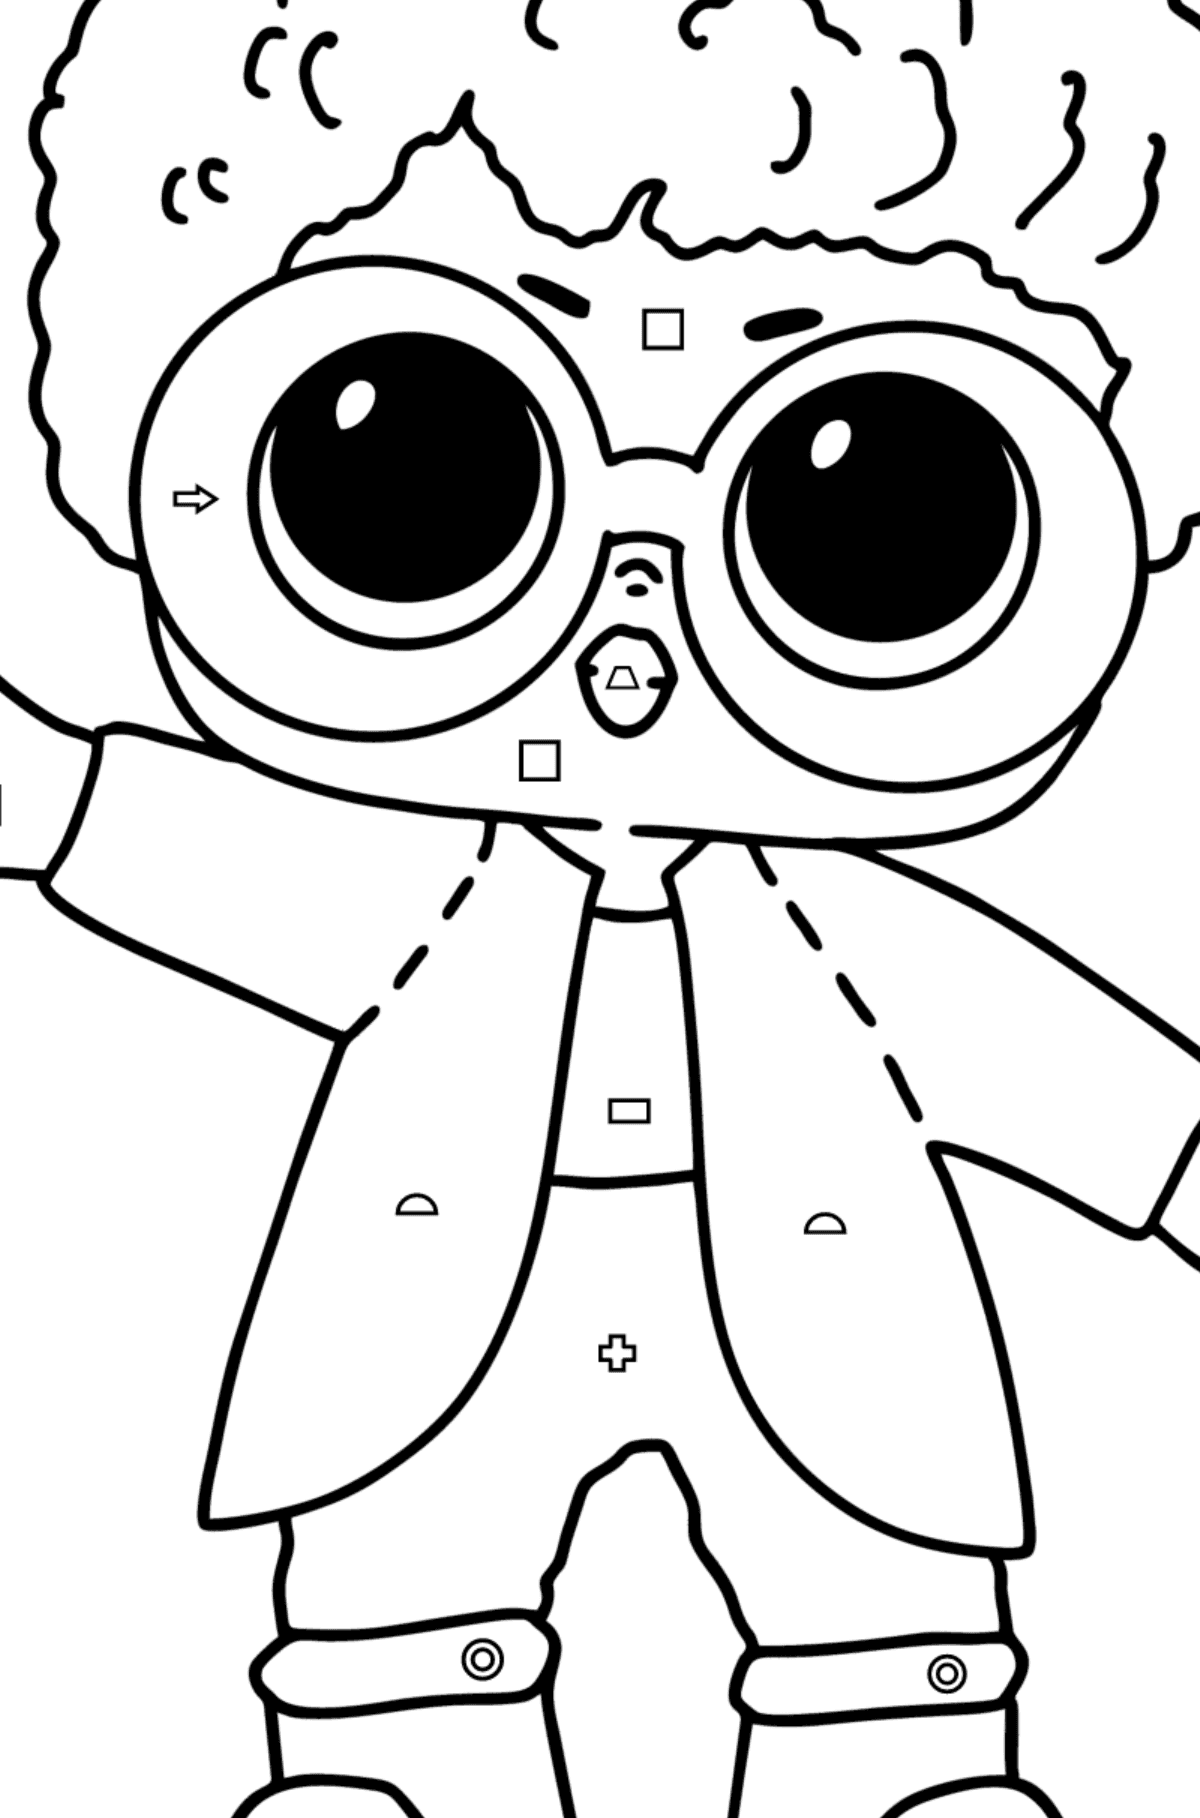 LOL Surprise Purple Reign Doll Boy coloring page - Coloring by Geometric Shapes for Kids